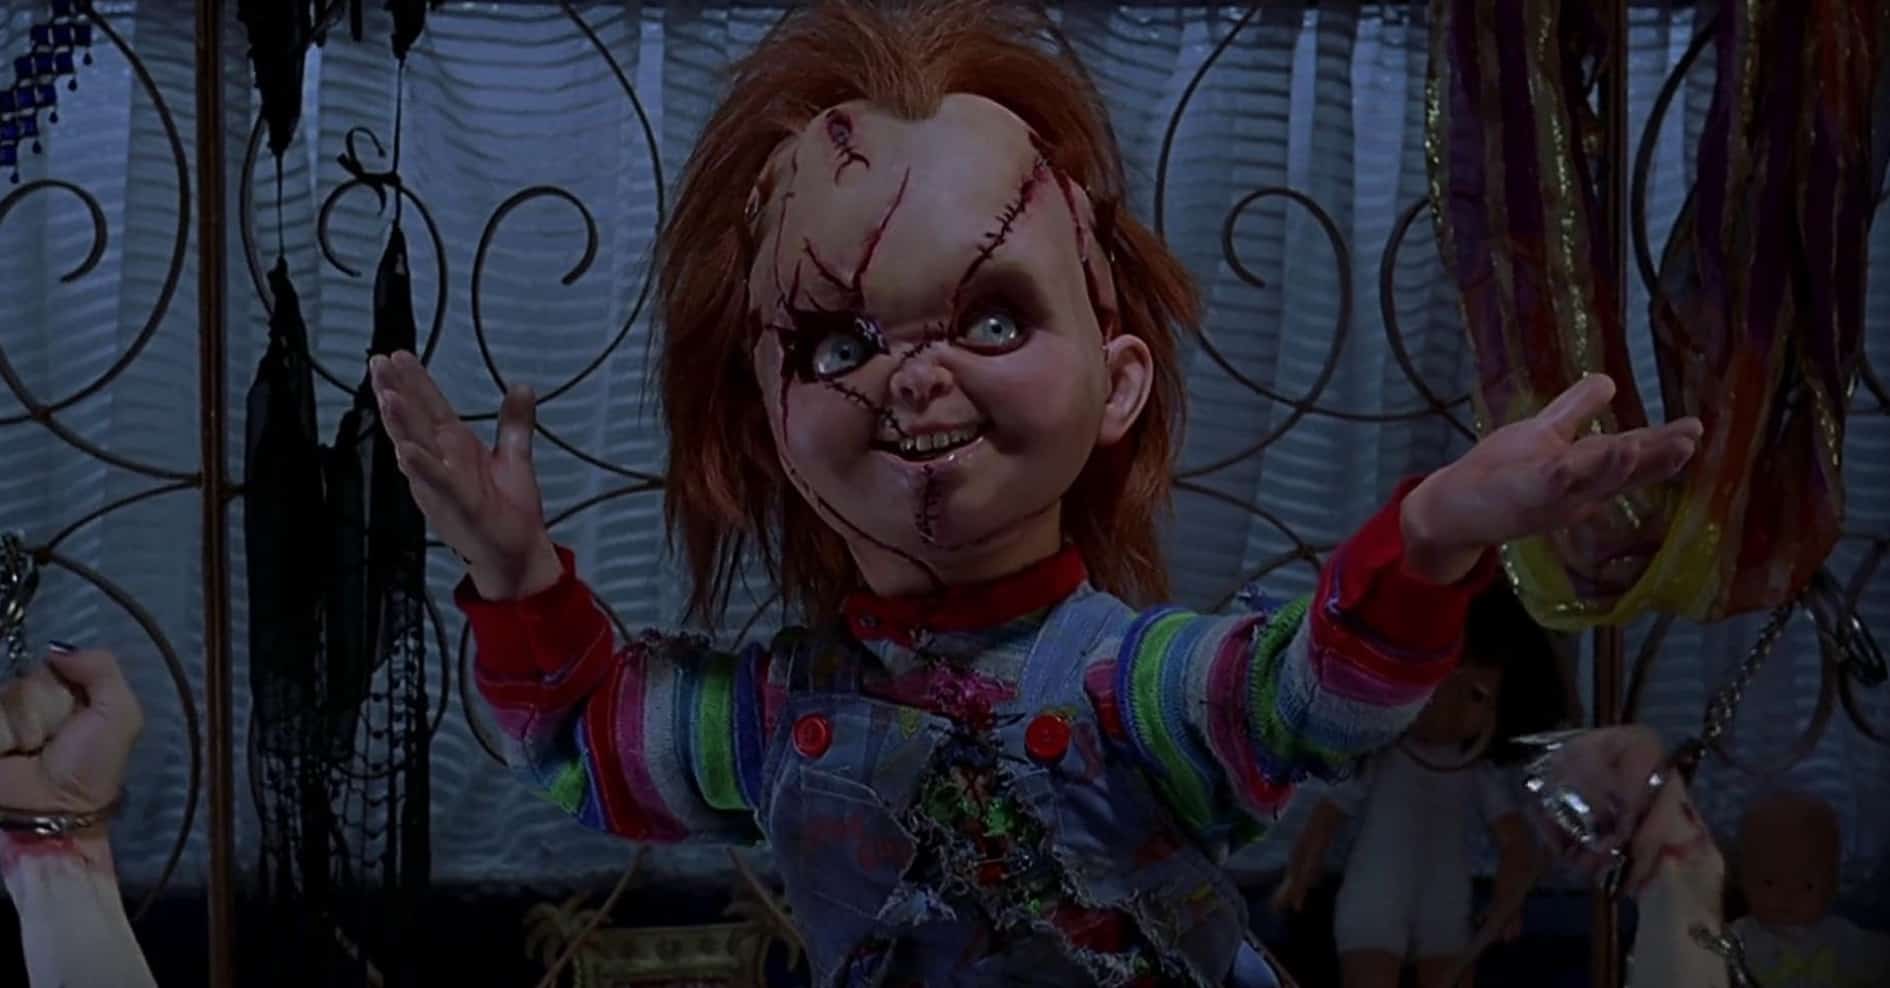 Evil Dolls, Ranked: From M3GAN to Chucky